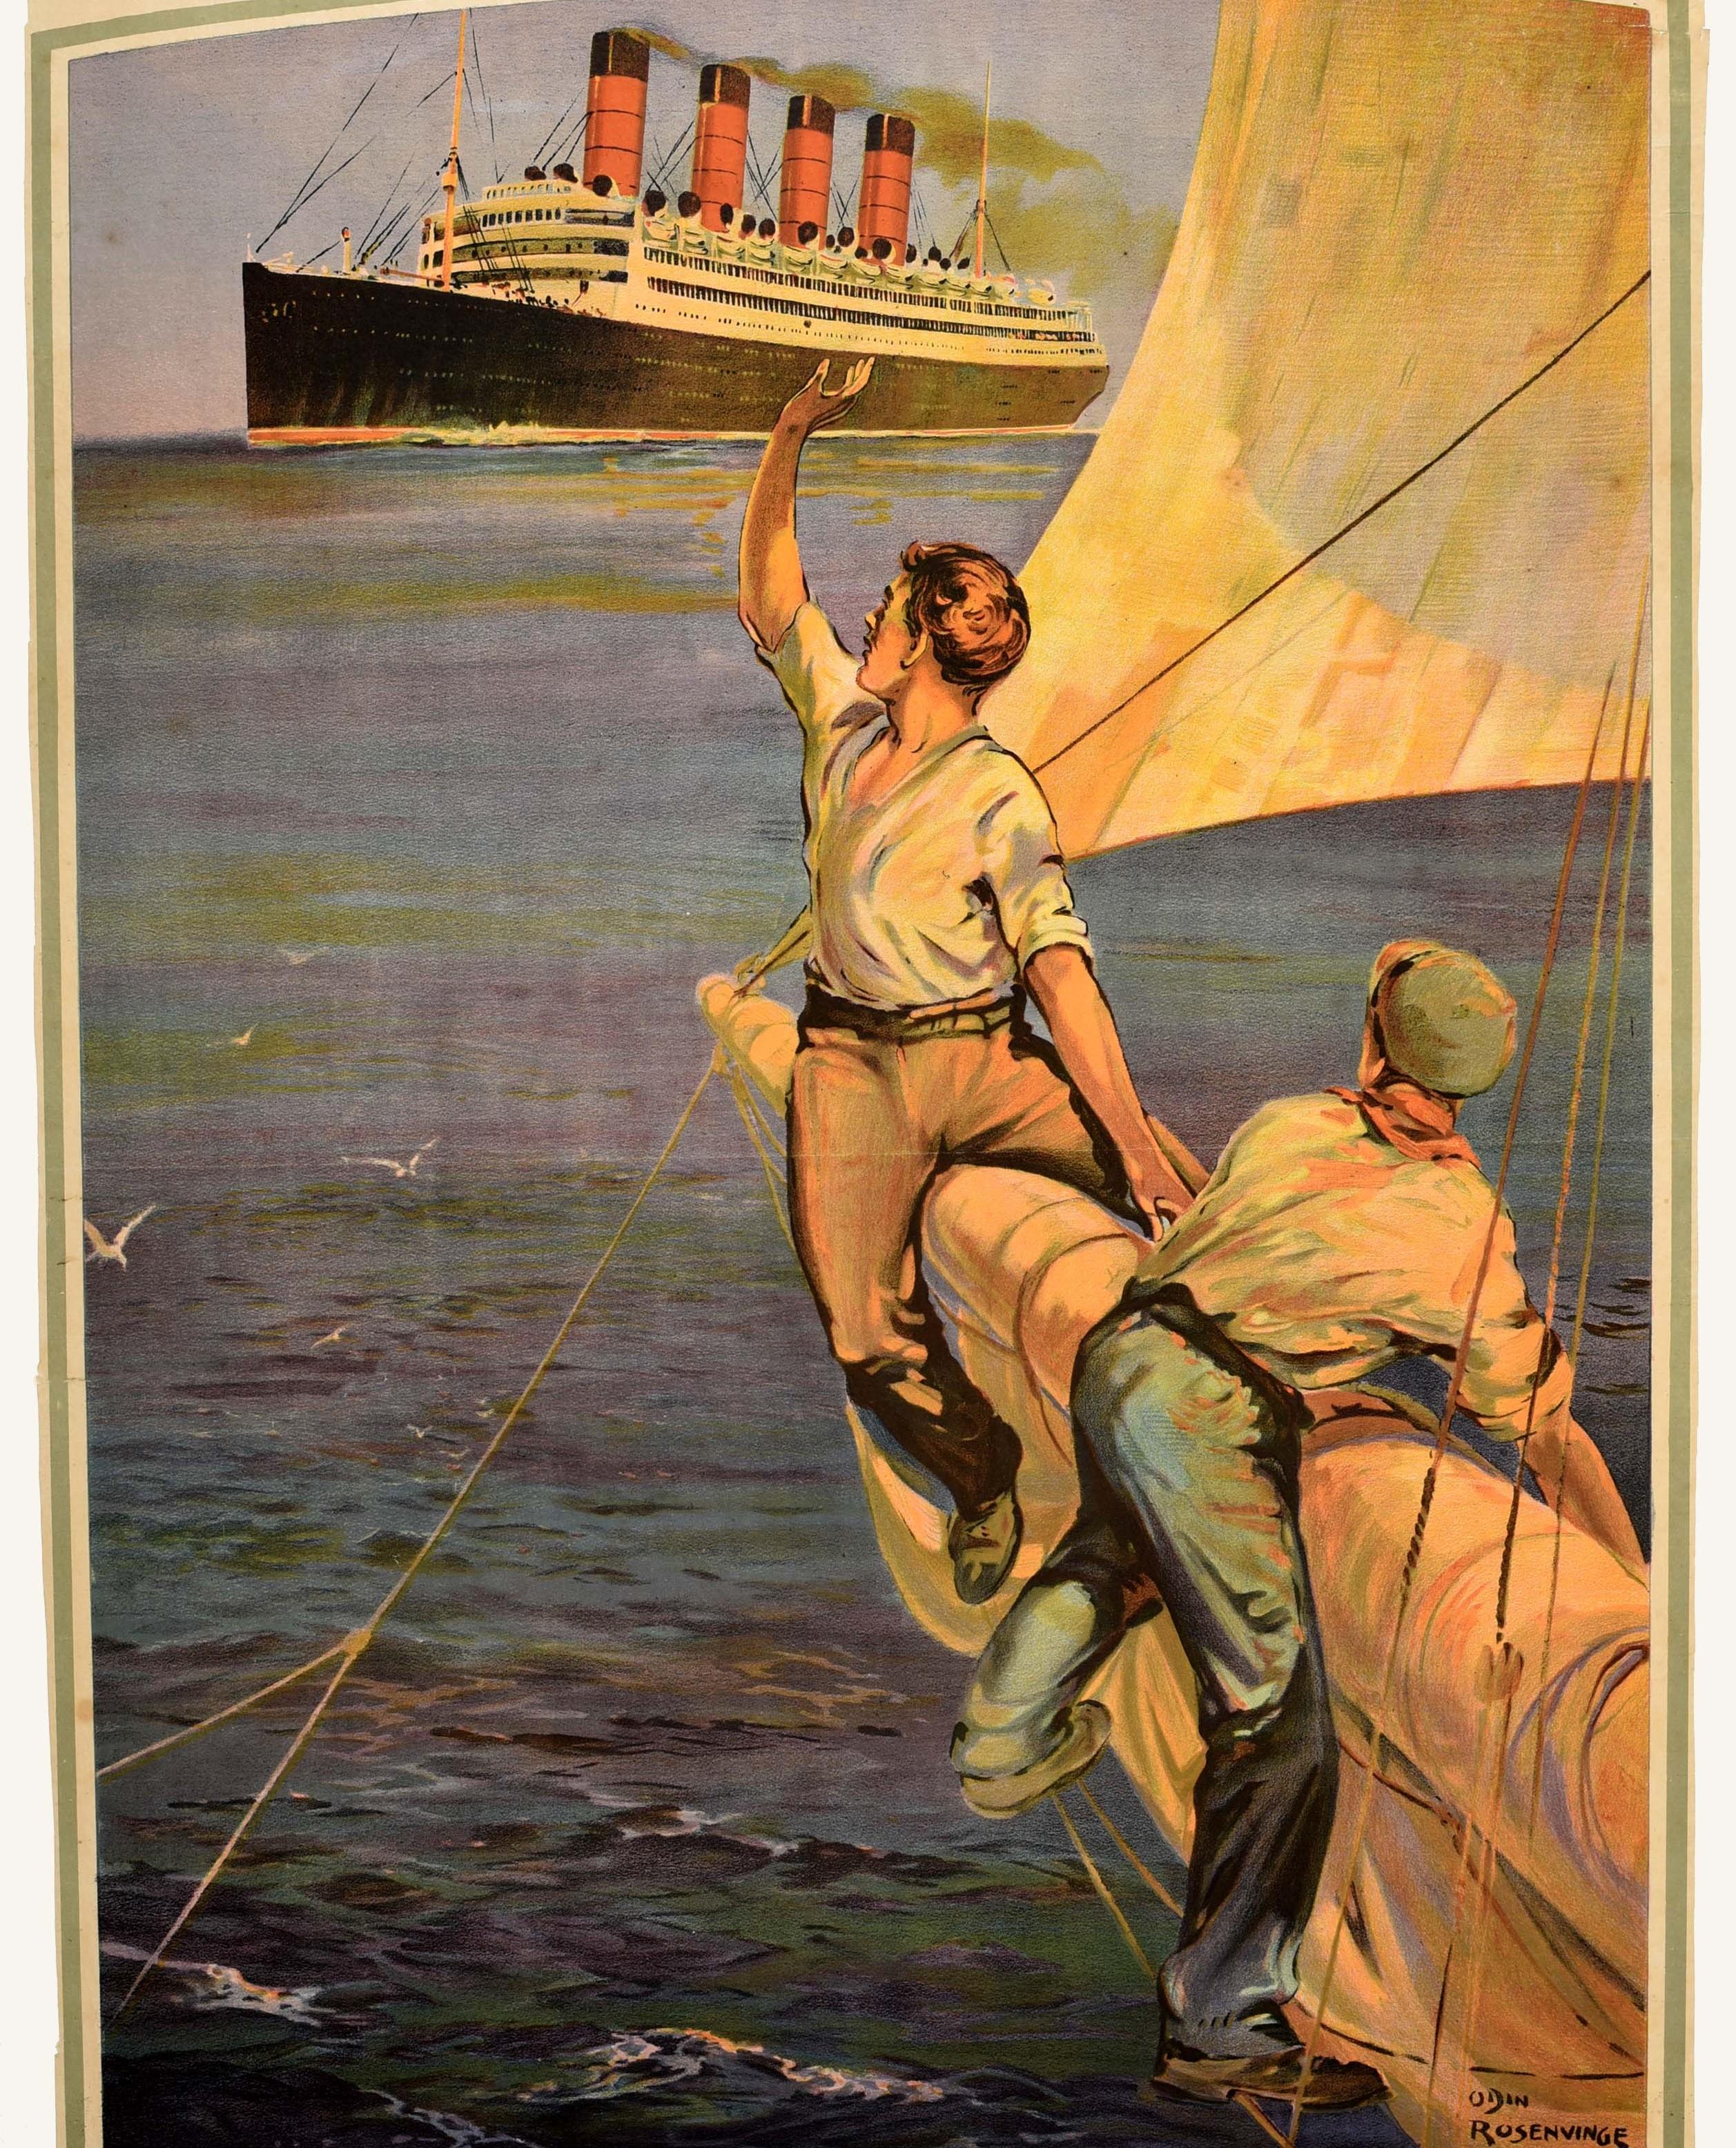 1920 travel posters